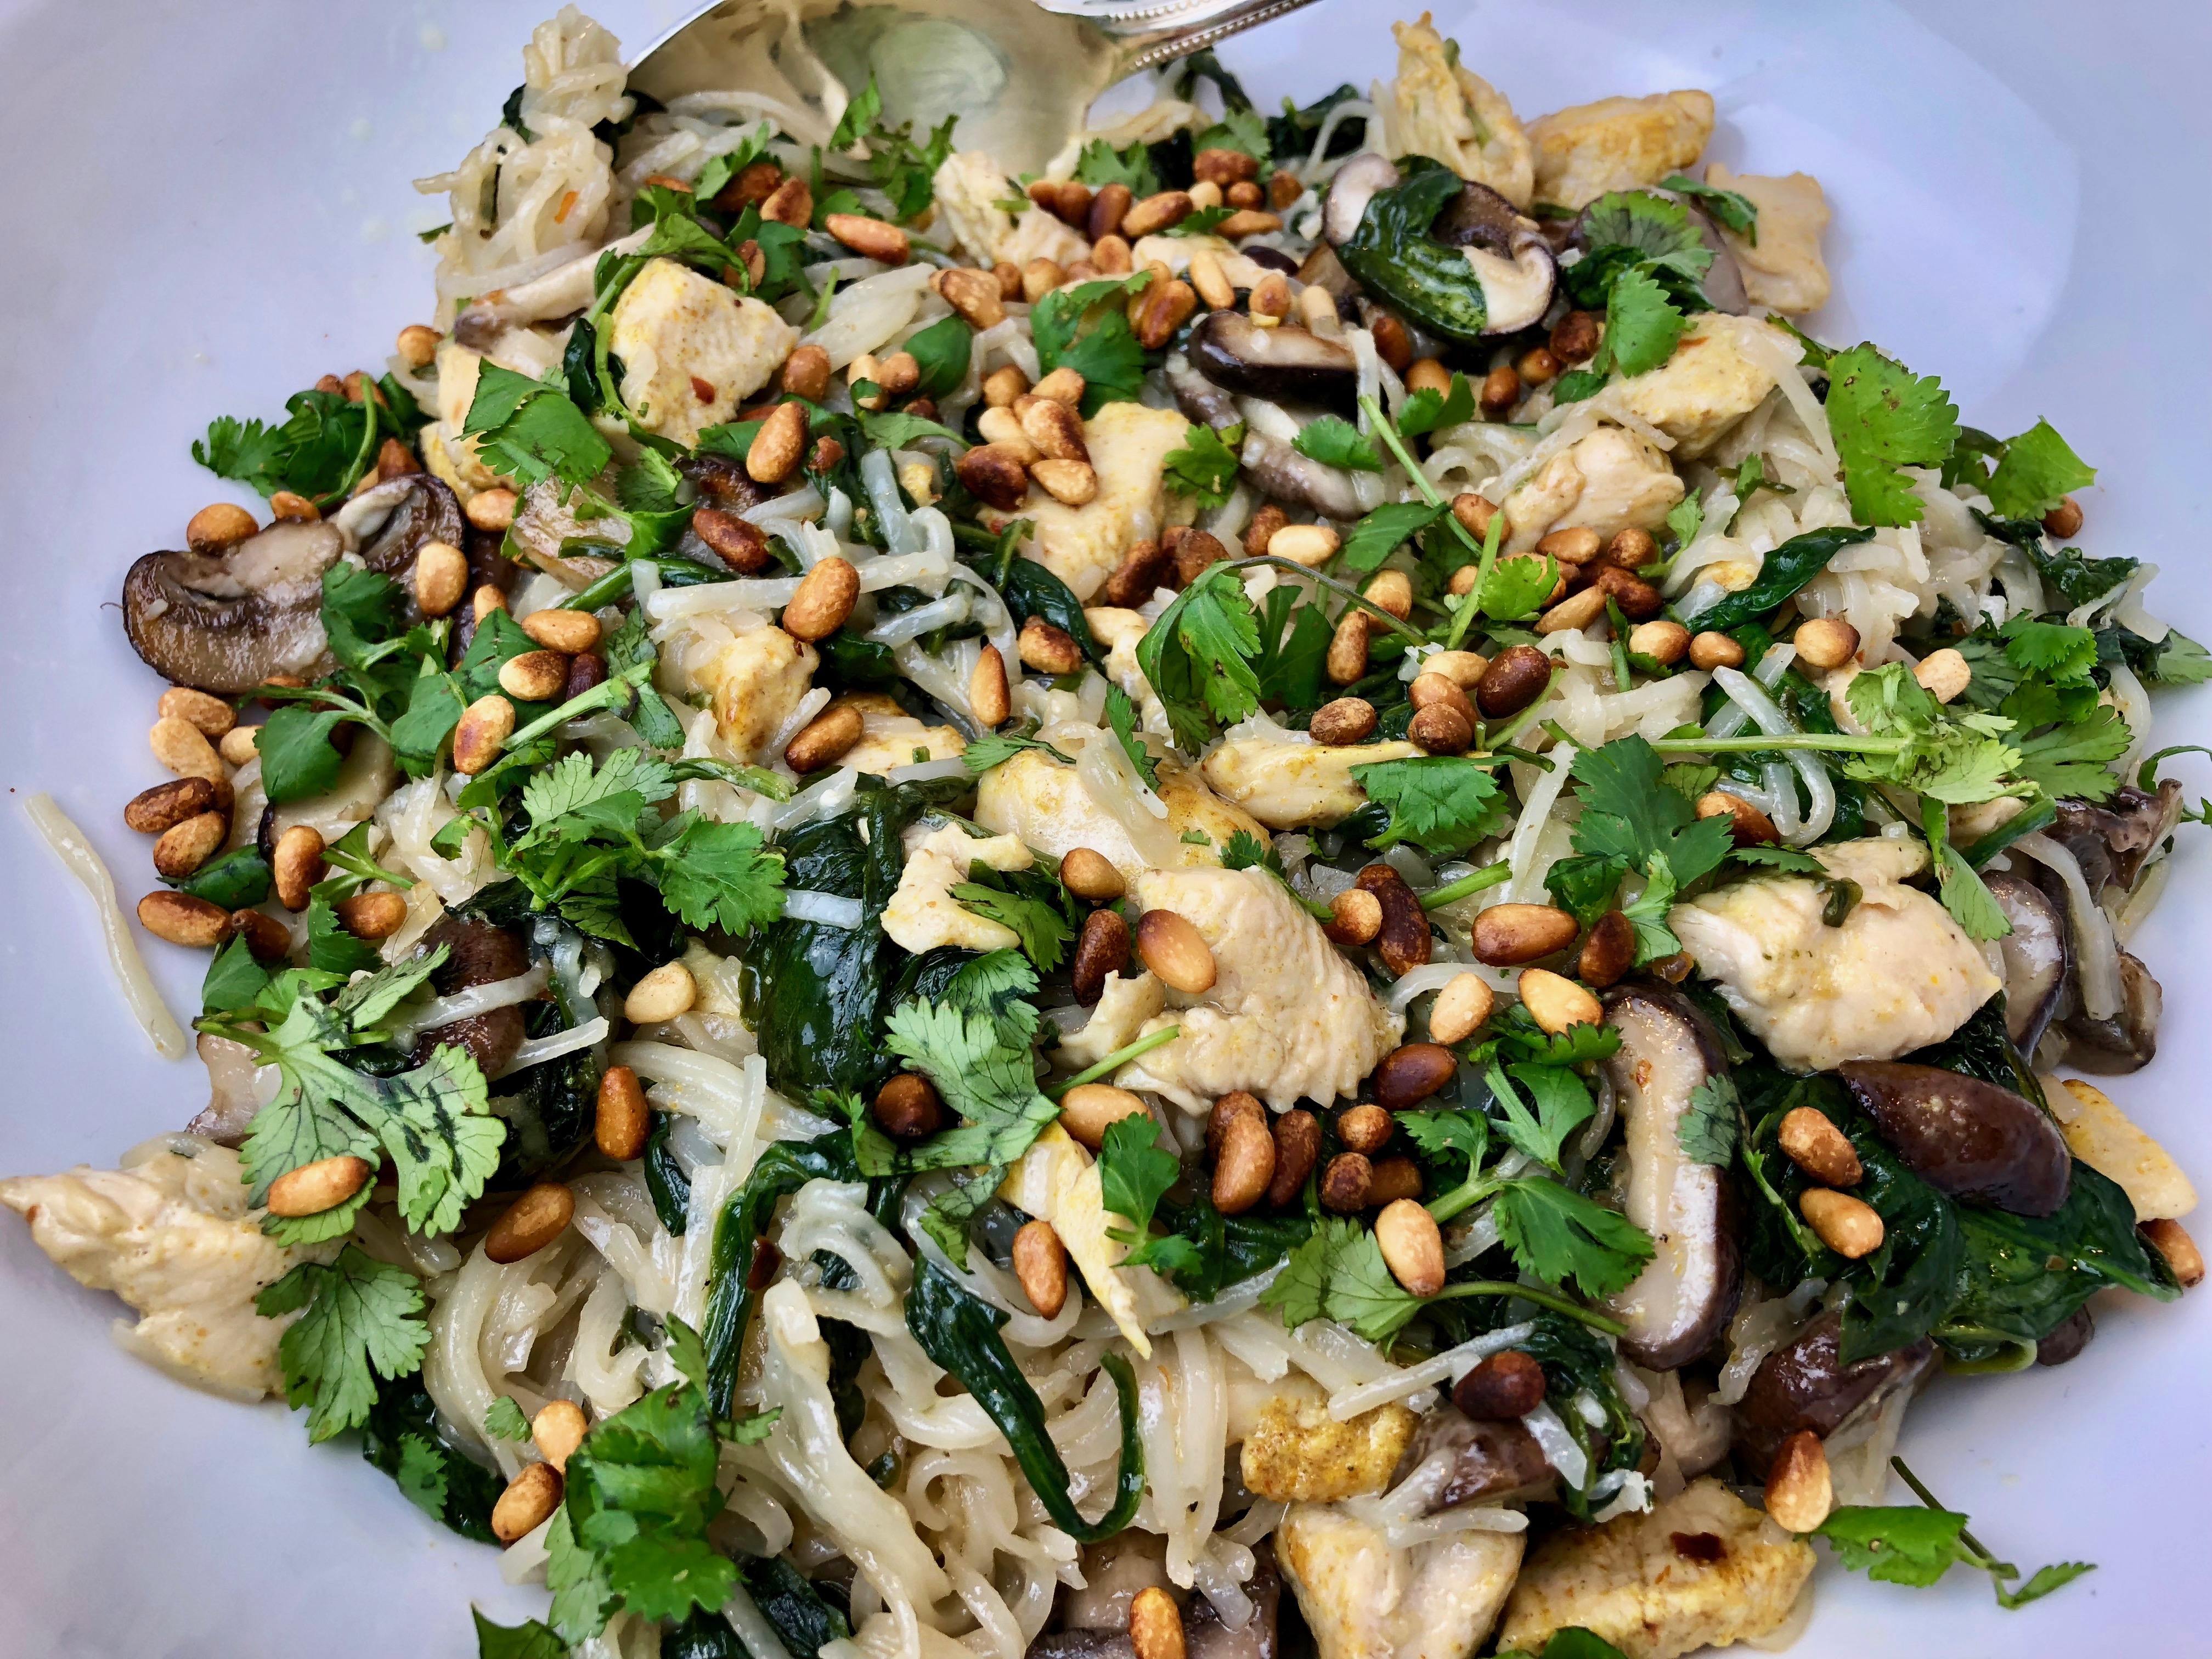 Coconut Curry Chicken with Spinach, Mushrooms and Pine Nuts – Gluten Free